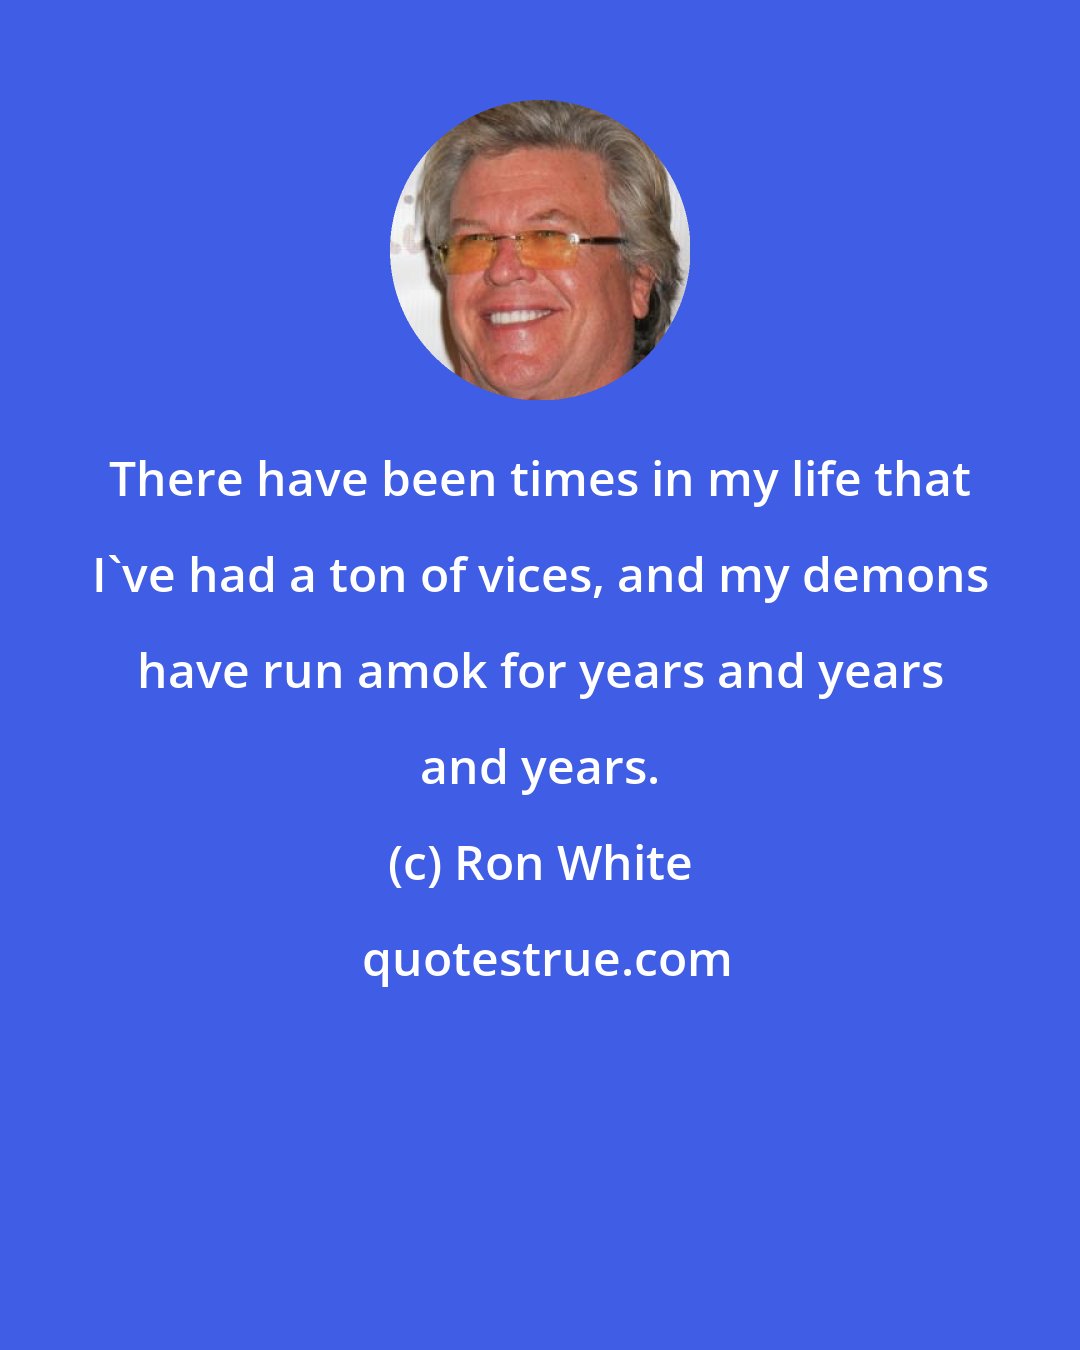 Ron White: There have been times in my life that I've had a ton of vices, and my demons have run amok for years and years and years.